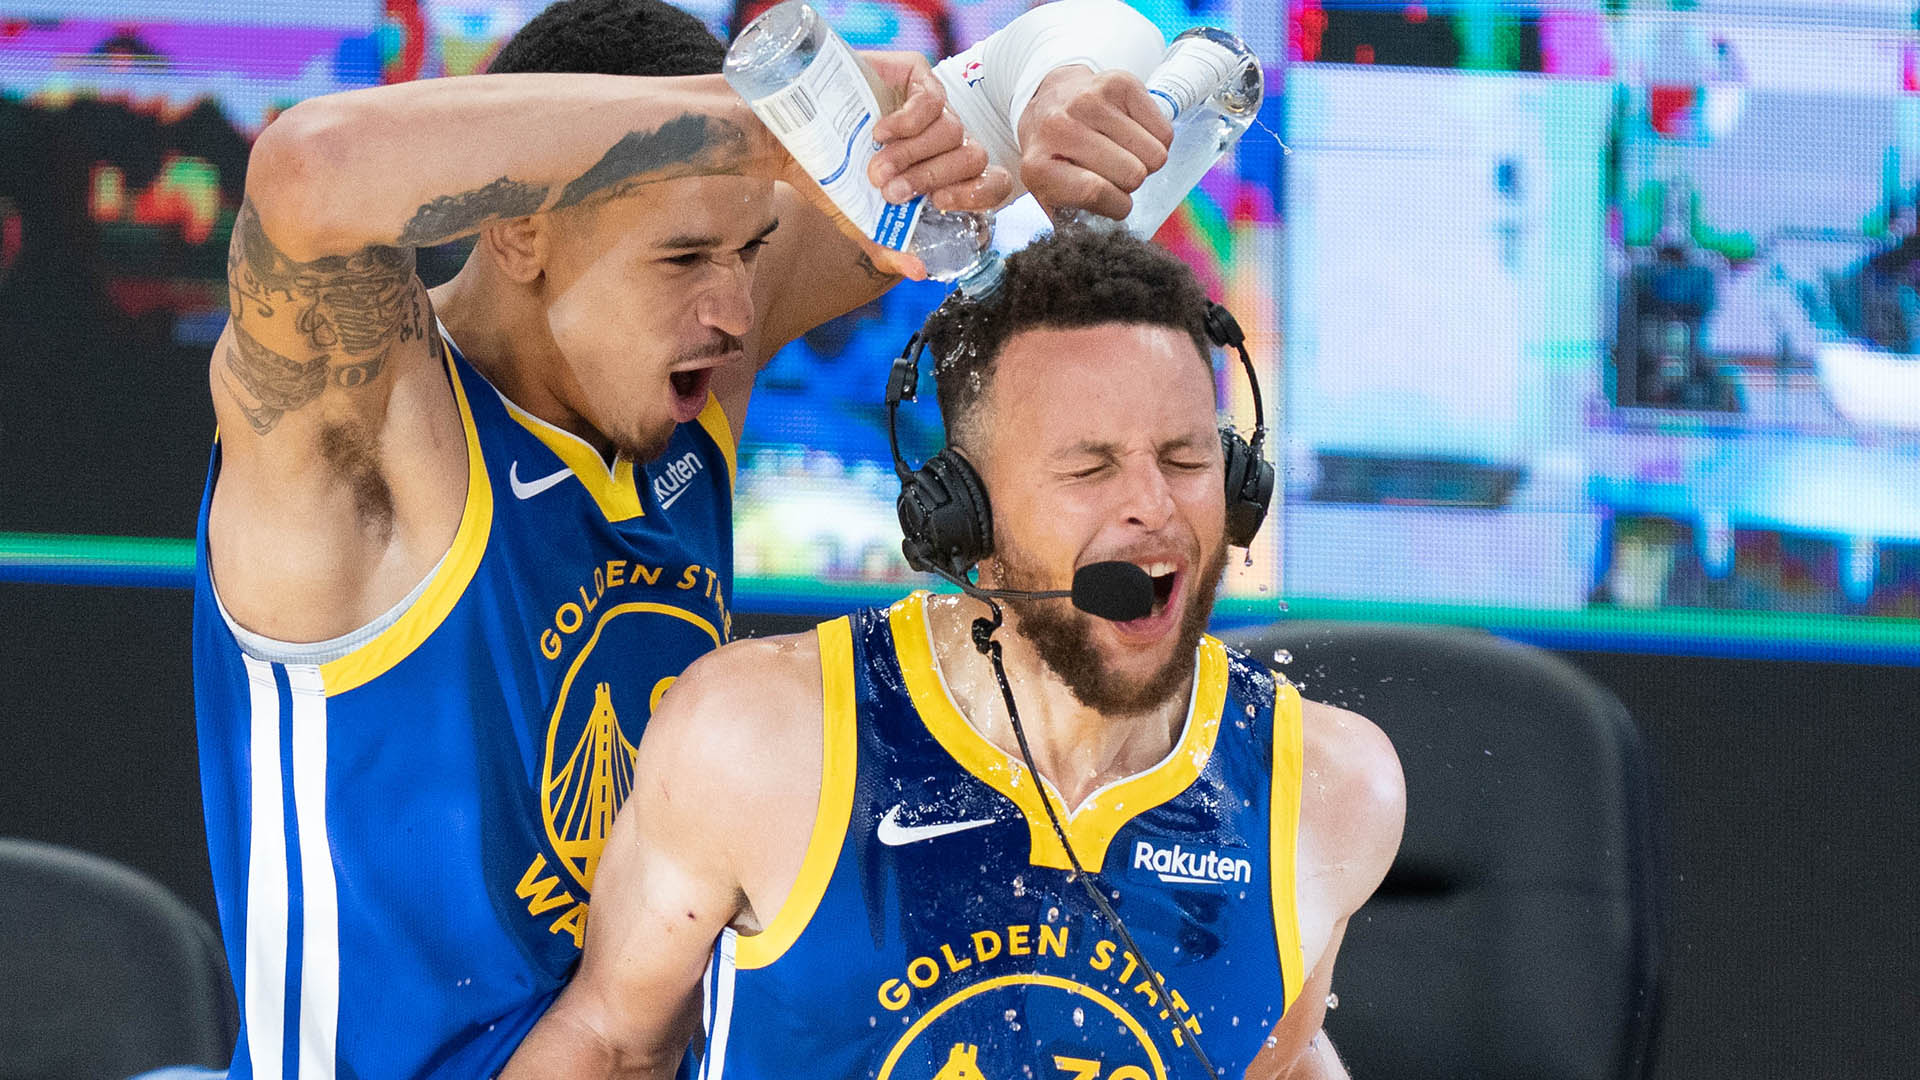 April 12, 2021; San Francisco, California, USA; Golden State Warriors forward Juan Toscano-Anderson (95) pours water on guard Stephen Curry (30) after the game against the Denver Nuggets at Chase Center. Mandatory Credit: Kyle Terada-USA TODAY Sports